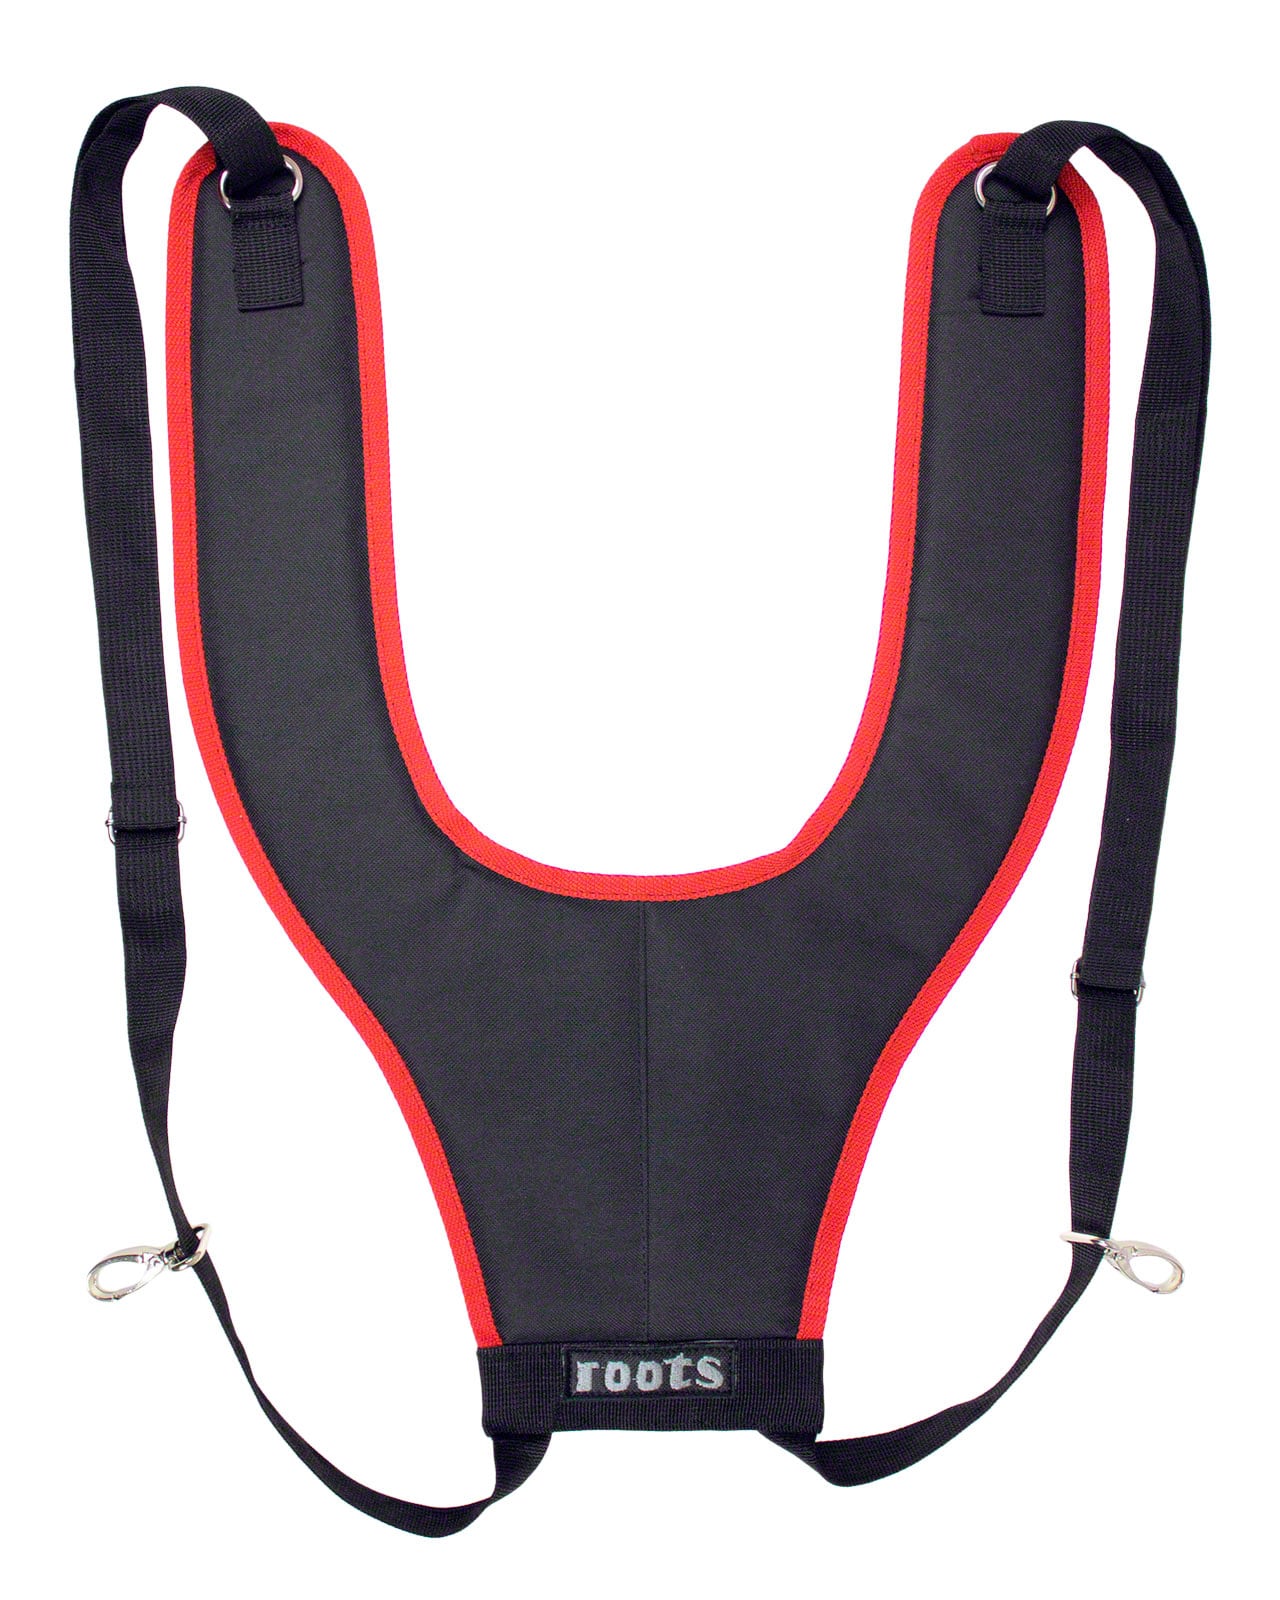 ROOTS PERCUSSION HARNESS STRAP Y DJEMBE - MULTI PERCUSSION